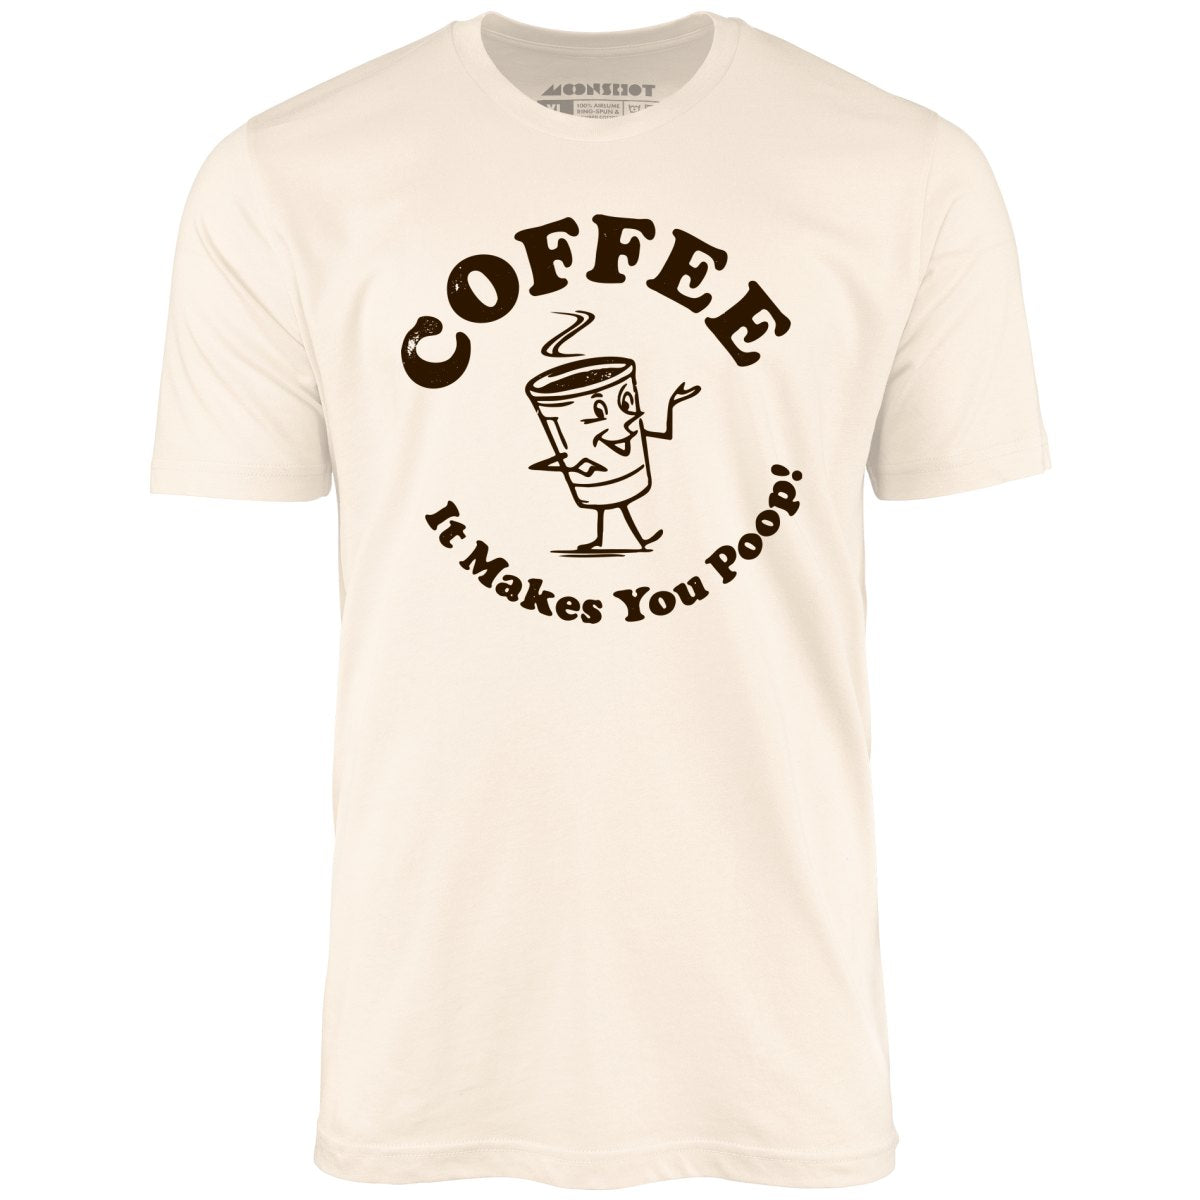 Coffee - It Makes You Poop! - Unisex T-Shirt